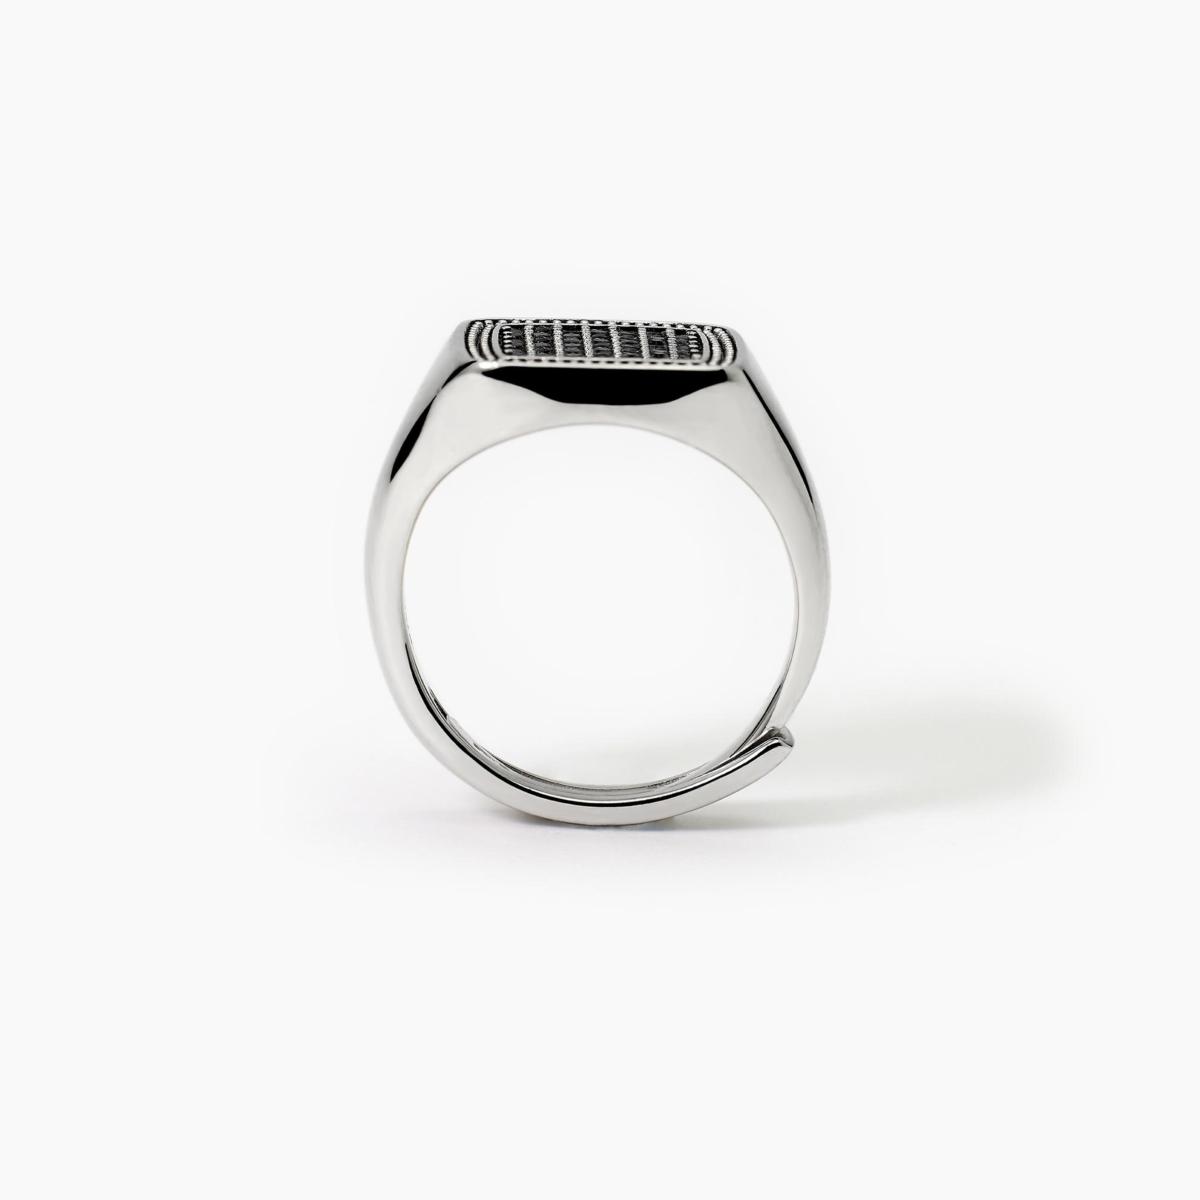 MABINA 925mm SILVER RING FOR MEN 523322 SIZE 19